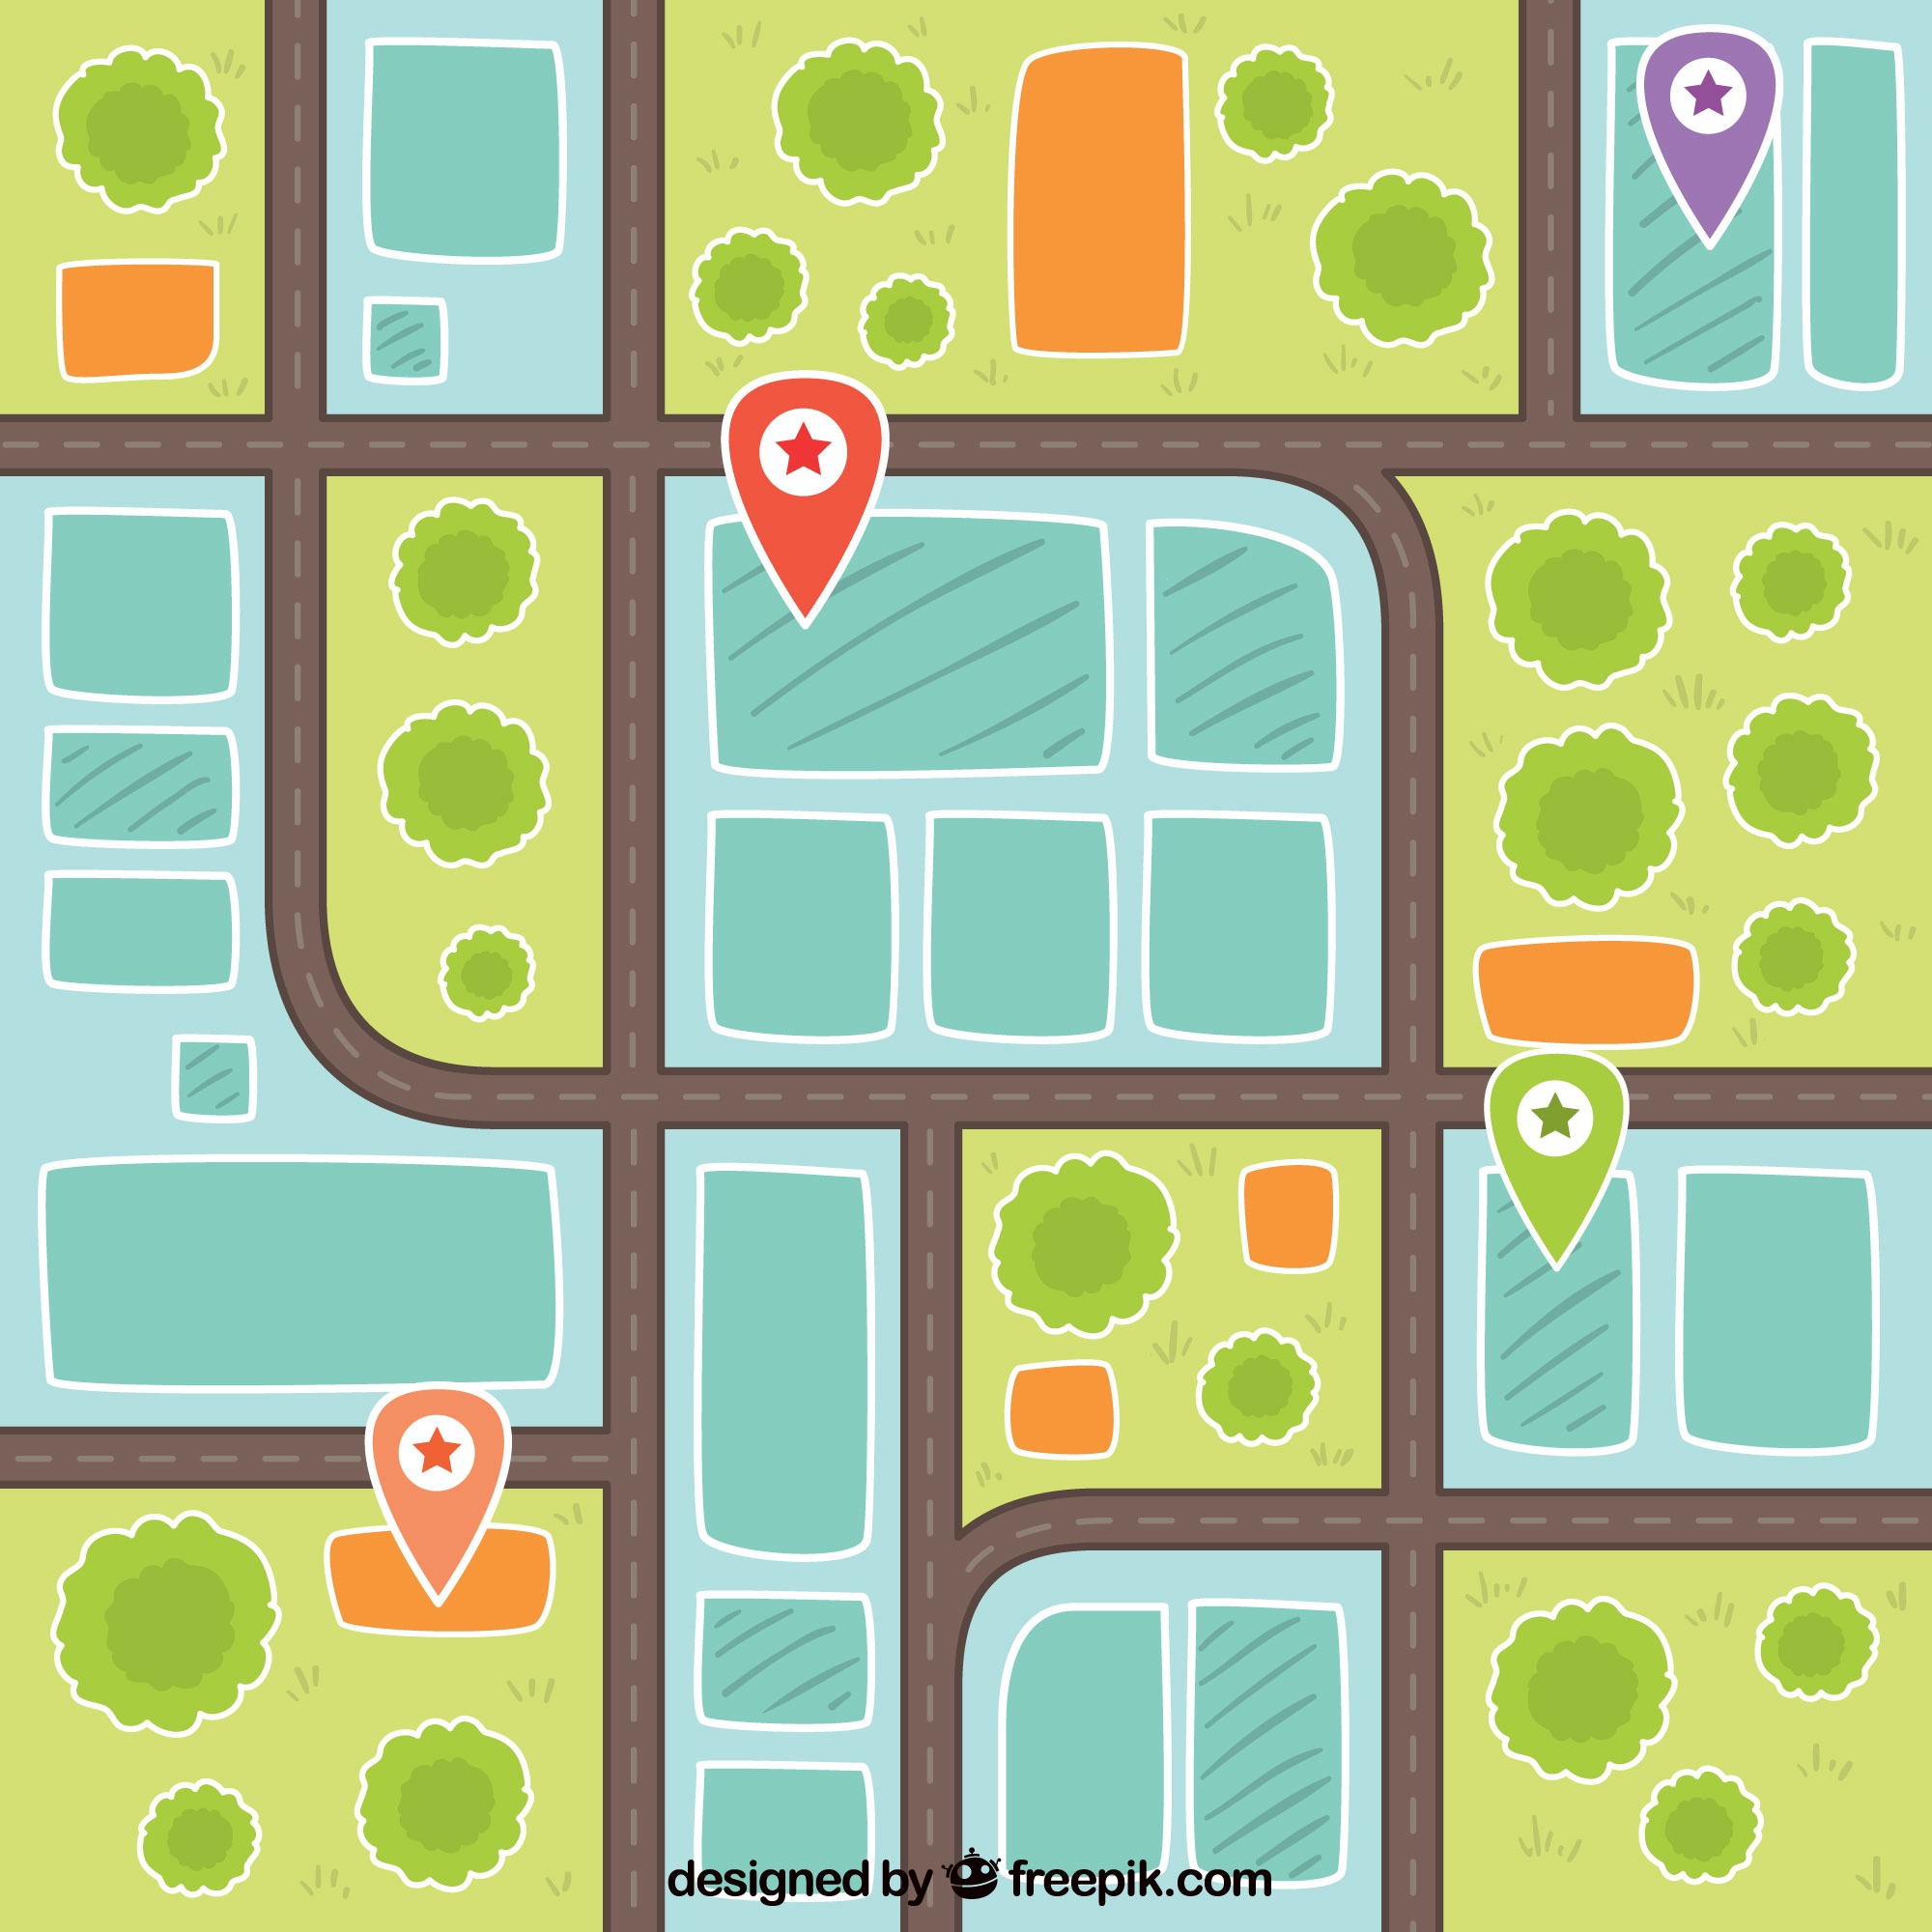 An illustration of a city map in GPS format